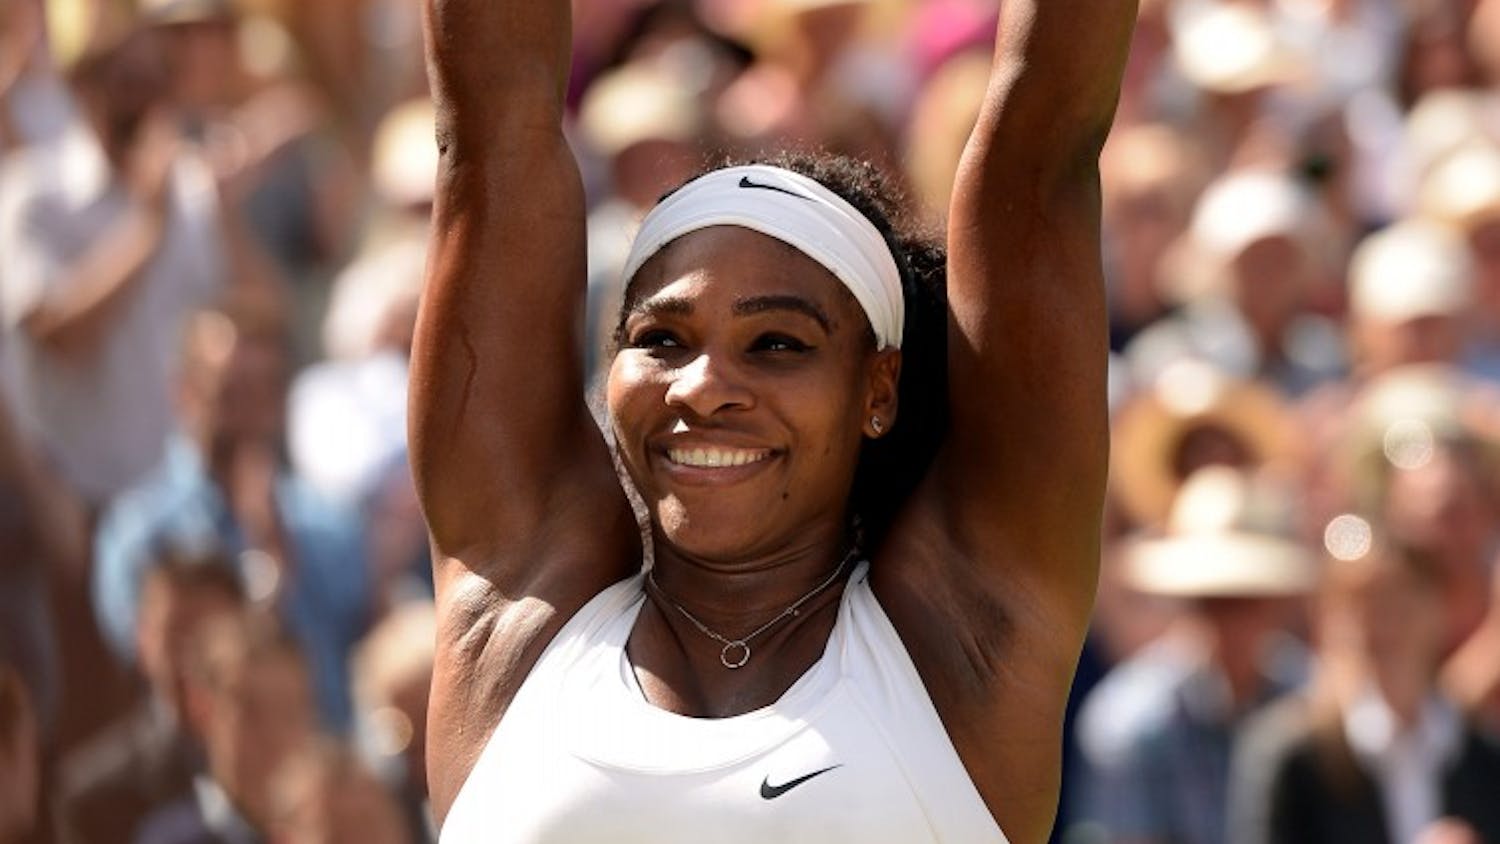 Serena Williams celebrates her sixth Wimbledon title and fourth consecutive win in a Grand Slam event after a 6-4, 6-4 win against Garbine Muguruza in the women's final at Wimbledon in London on Saturday, July 11, 2015. (Adam Davy/PA Wire/Zuma Press/TNS)